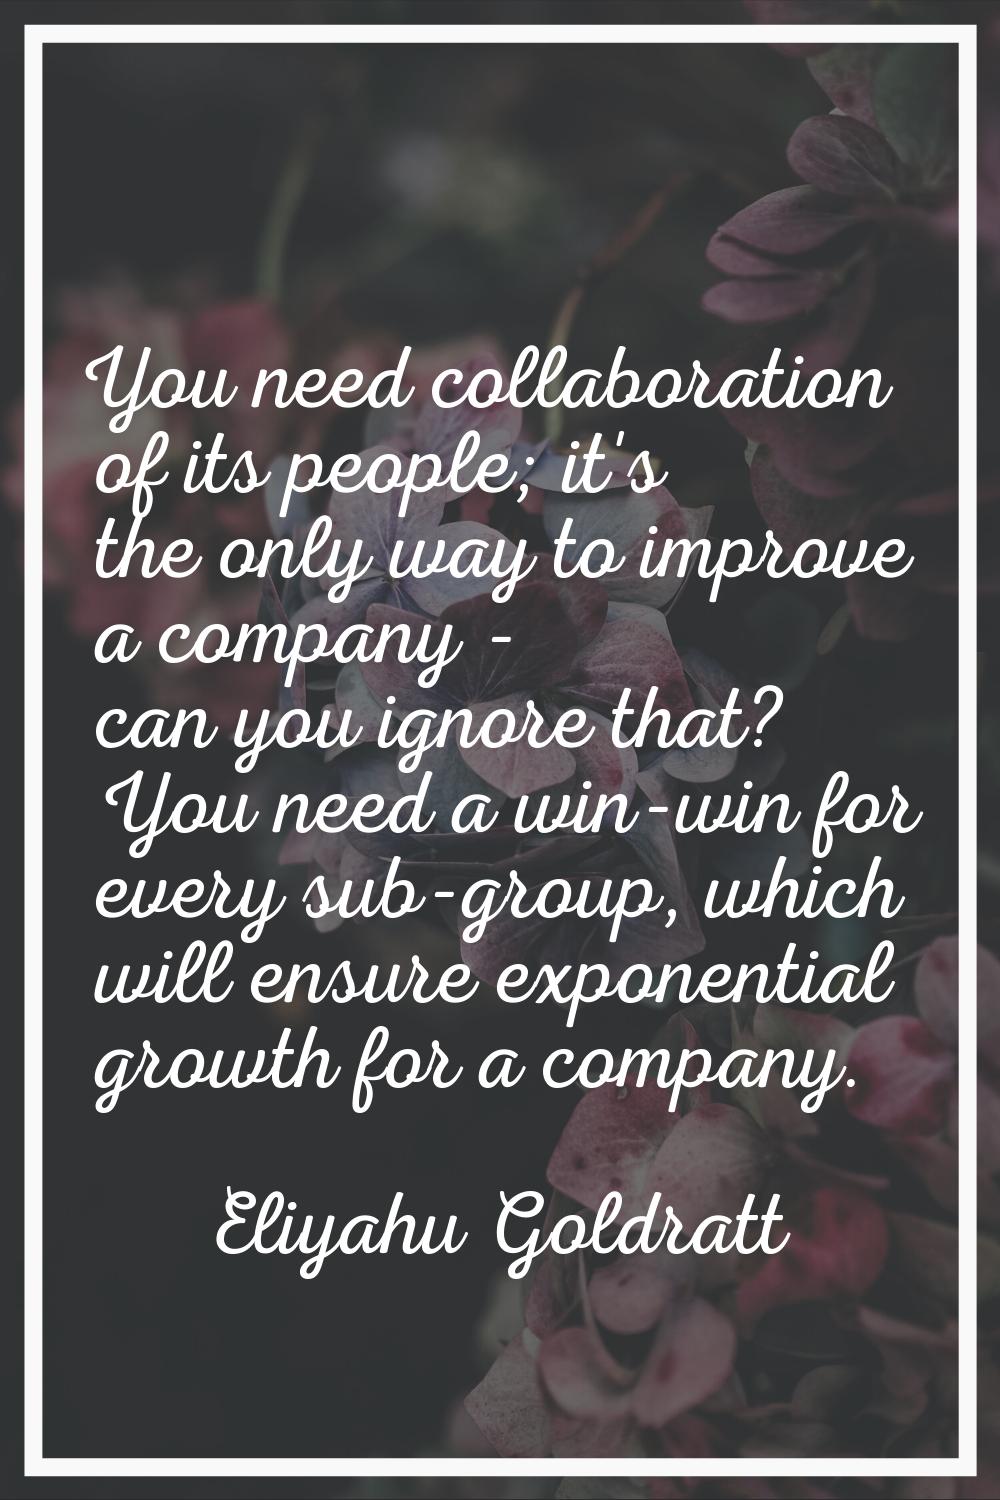 You need collaboration of its people; it's the only way to improve a company - can you ignore that?